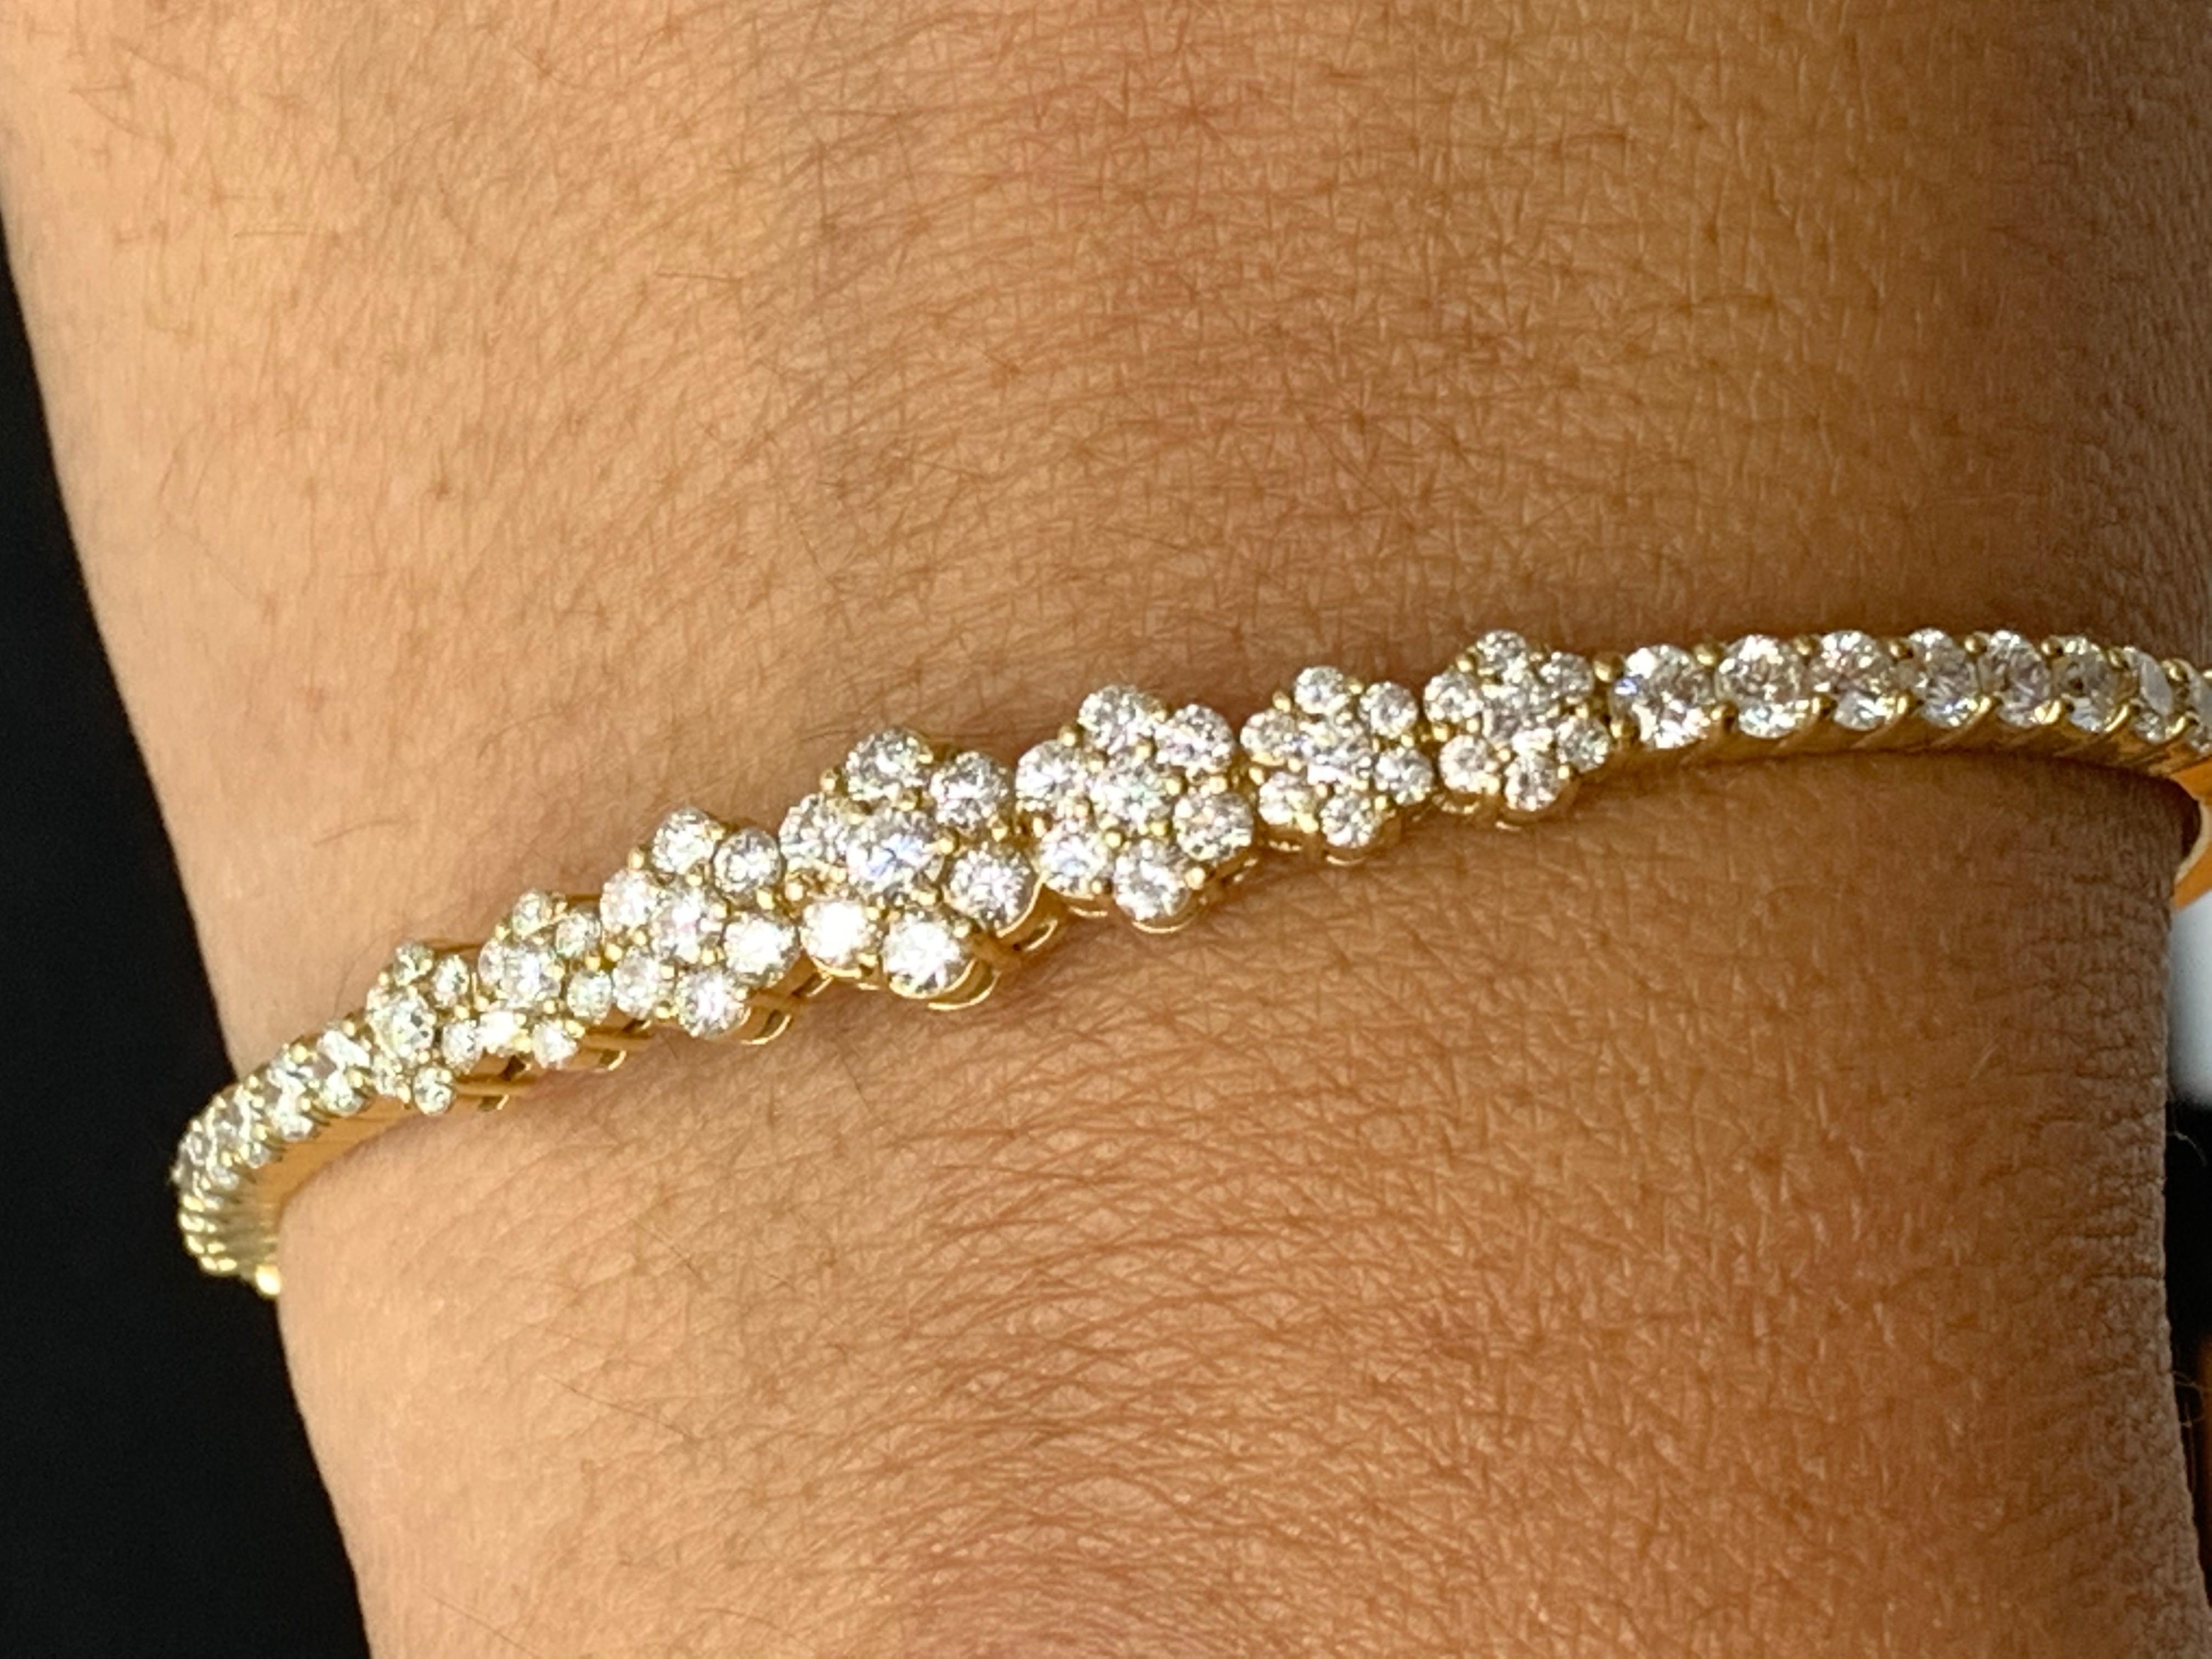 Sparkle in the spotlight with this diamond bangle bracelet. Brilliant cut Diamond flowers graduating towards the center weigh 2.54 carat in total. Set in a 14k yellow gold basket. A hinged design bracelet for easy wear and removal. 

All diamonds